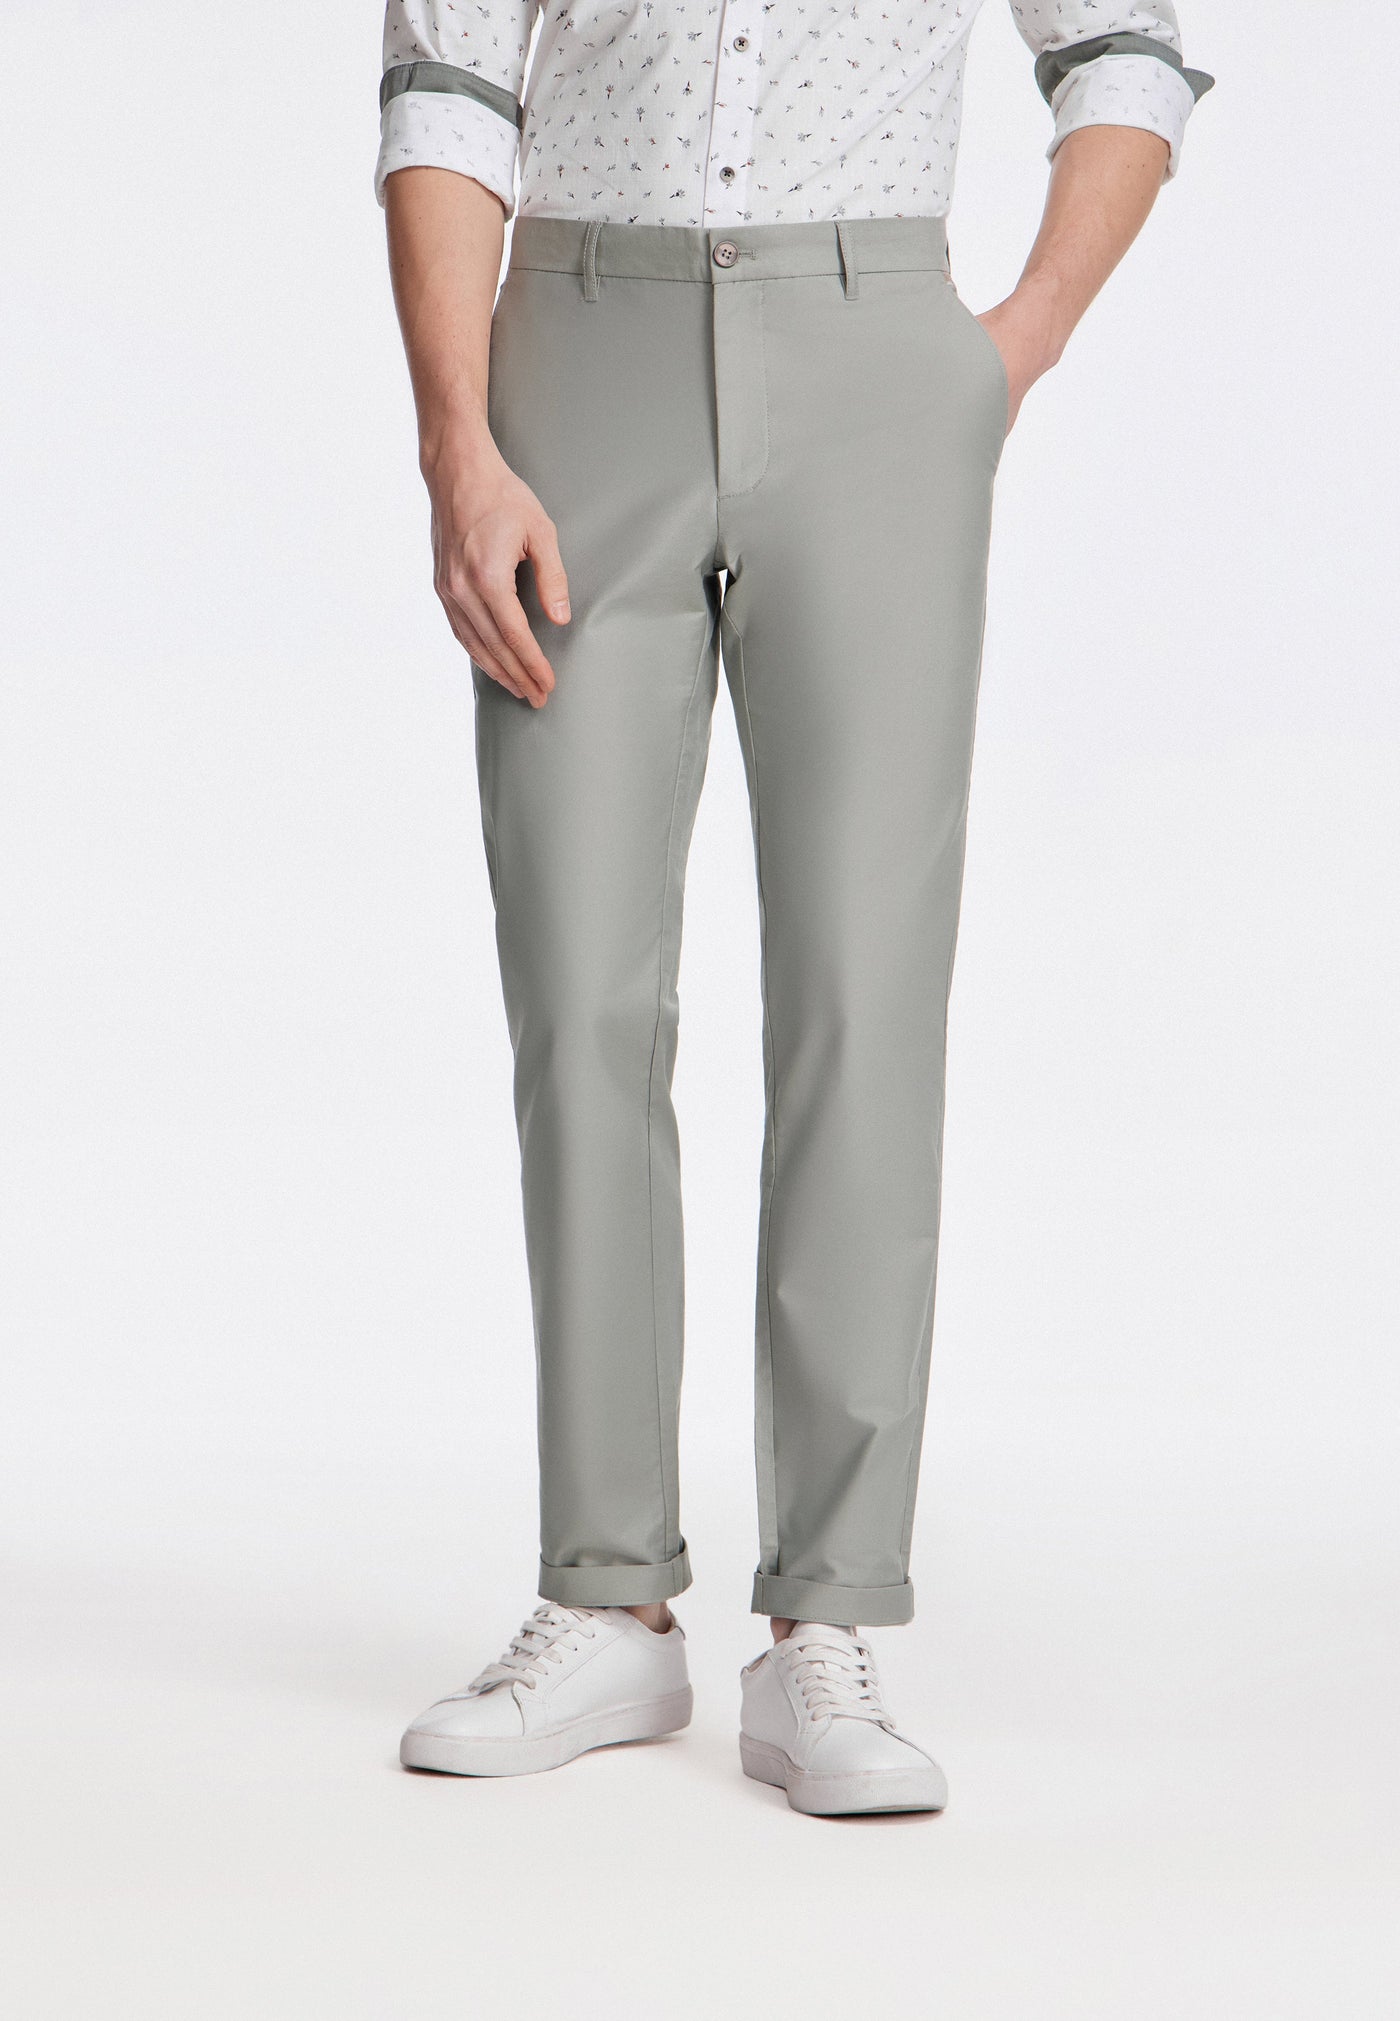 Mencody - Soft Cotton Rich Causal Pants Extra Slim Fit